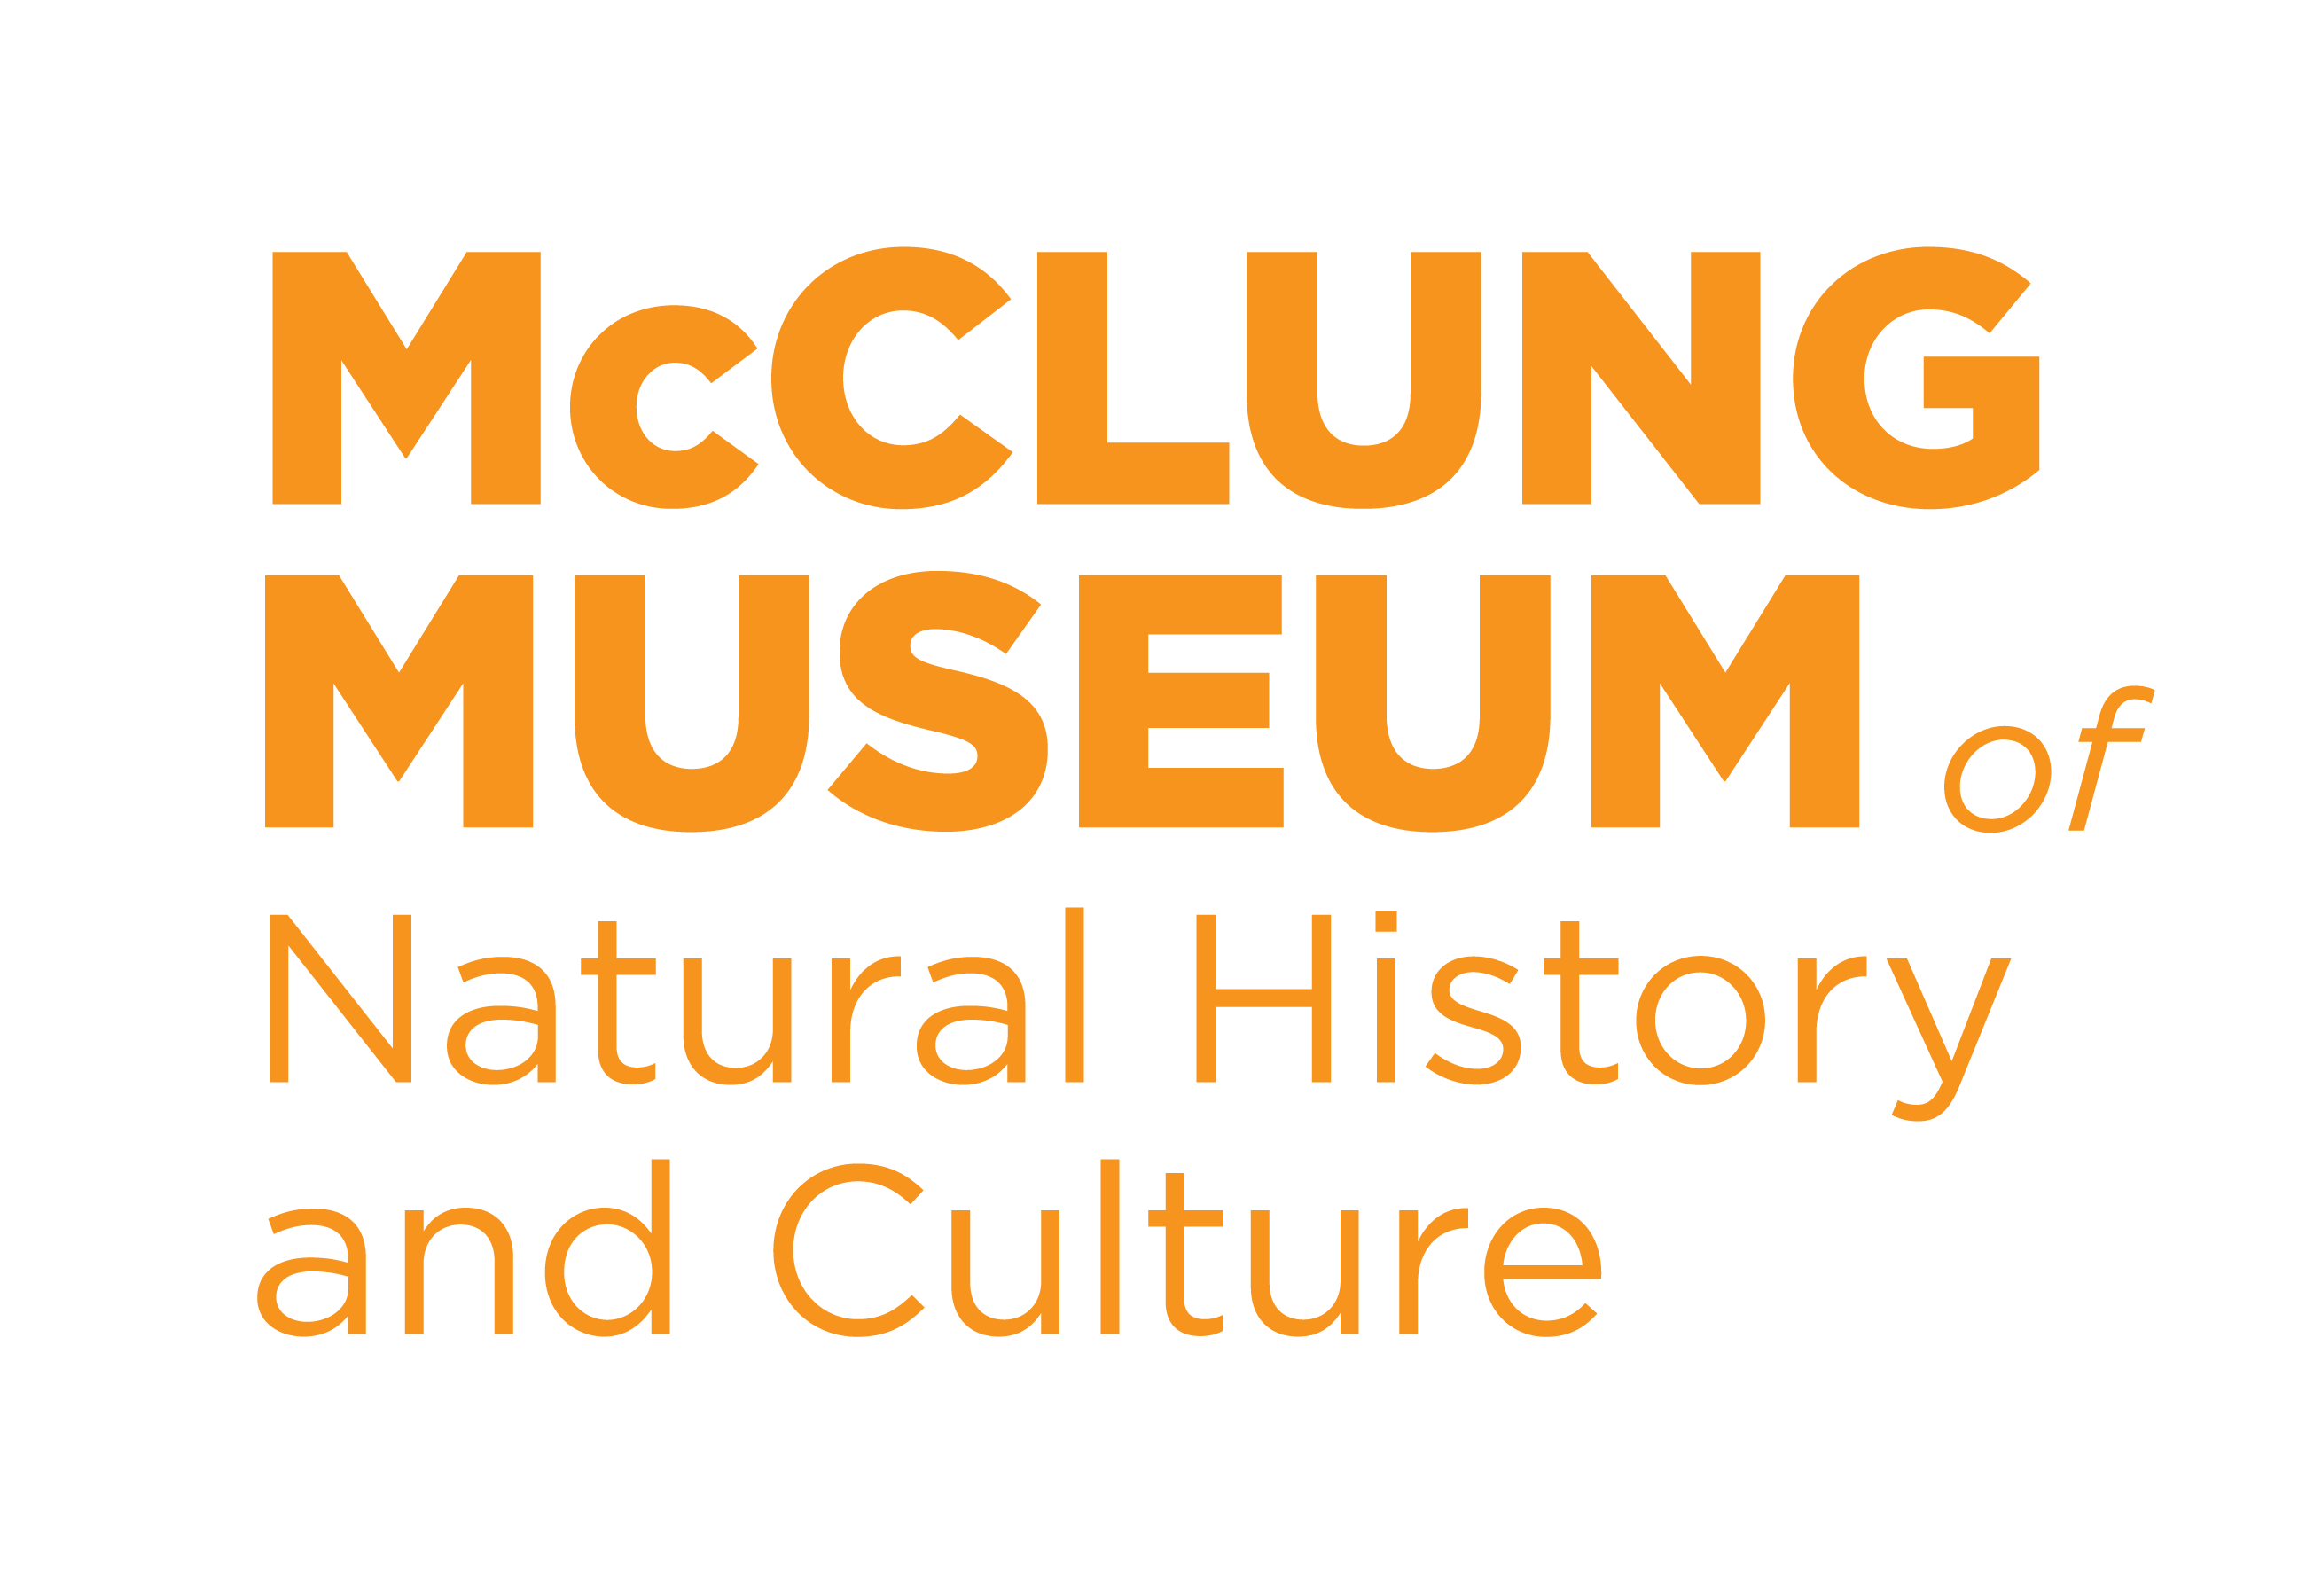 Employer Provided Image-McClung Museum of Natural History and Culture